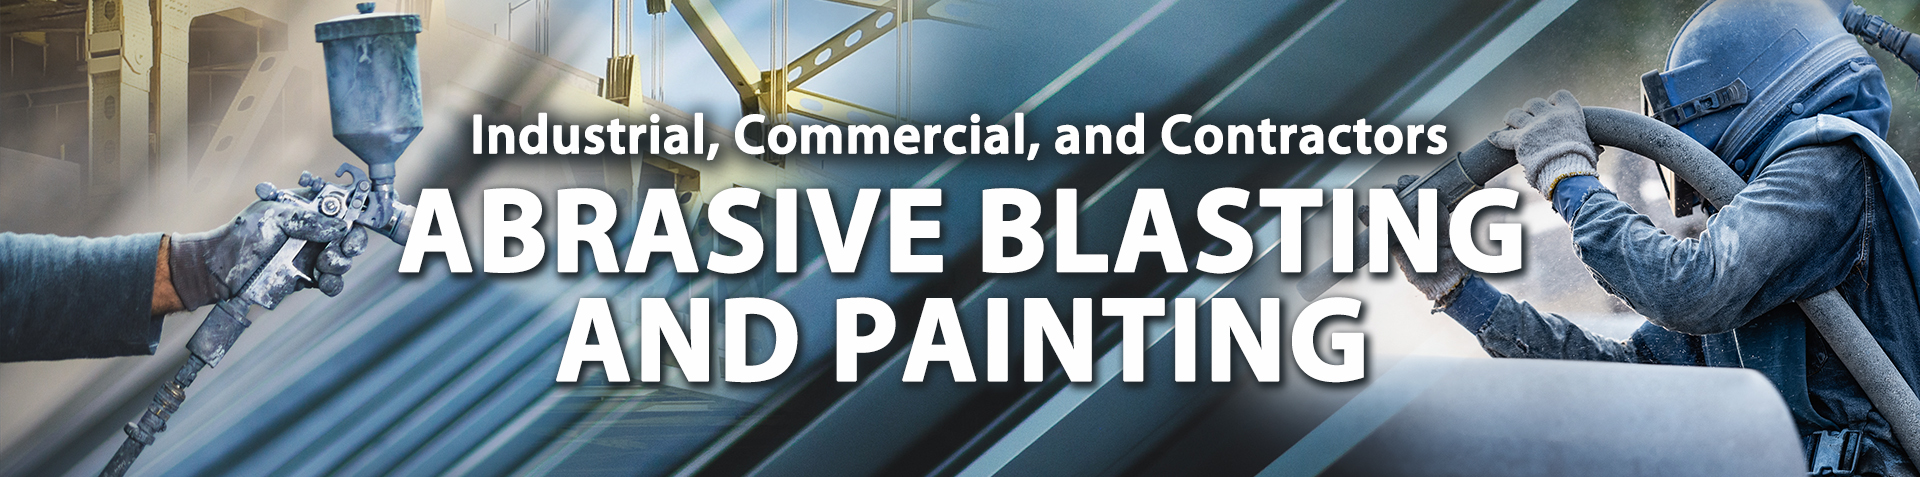 Industrial, Commercial, and Contractors Abrasive Blasting and Painting